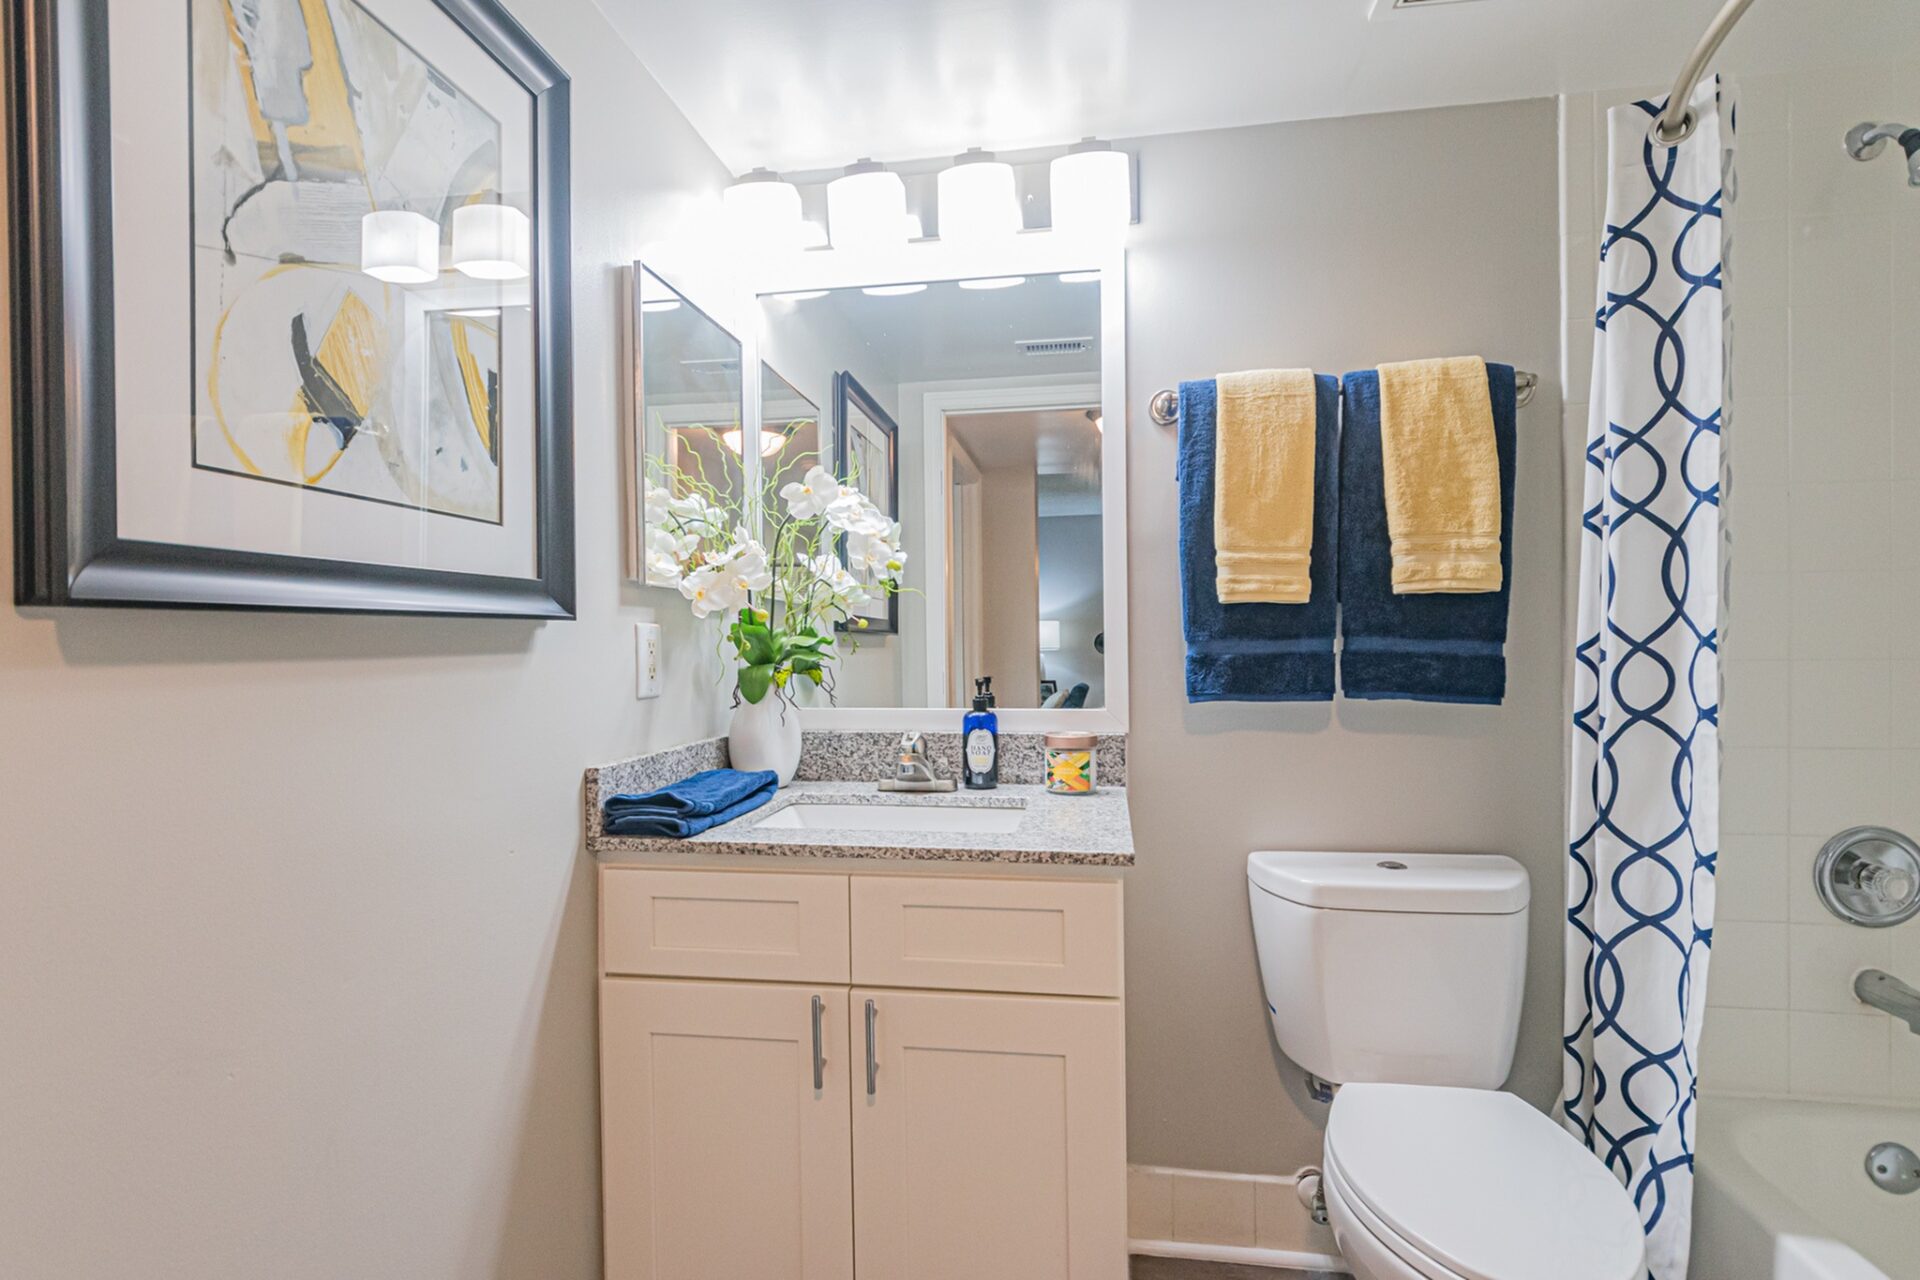 Bathroom with white cabinets, a tub, and a large mirror at an apartment at Beach Walk at Sheridan.